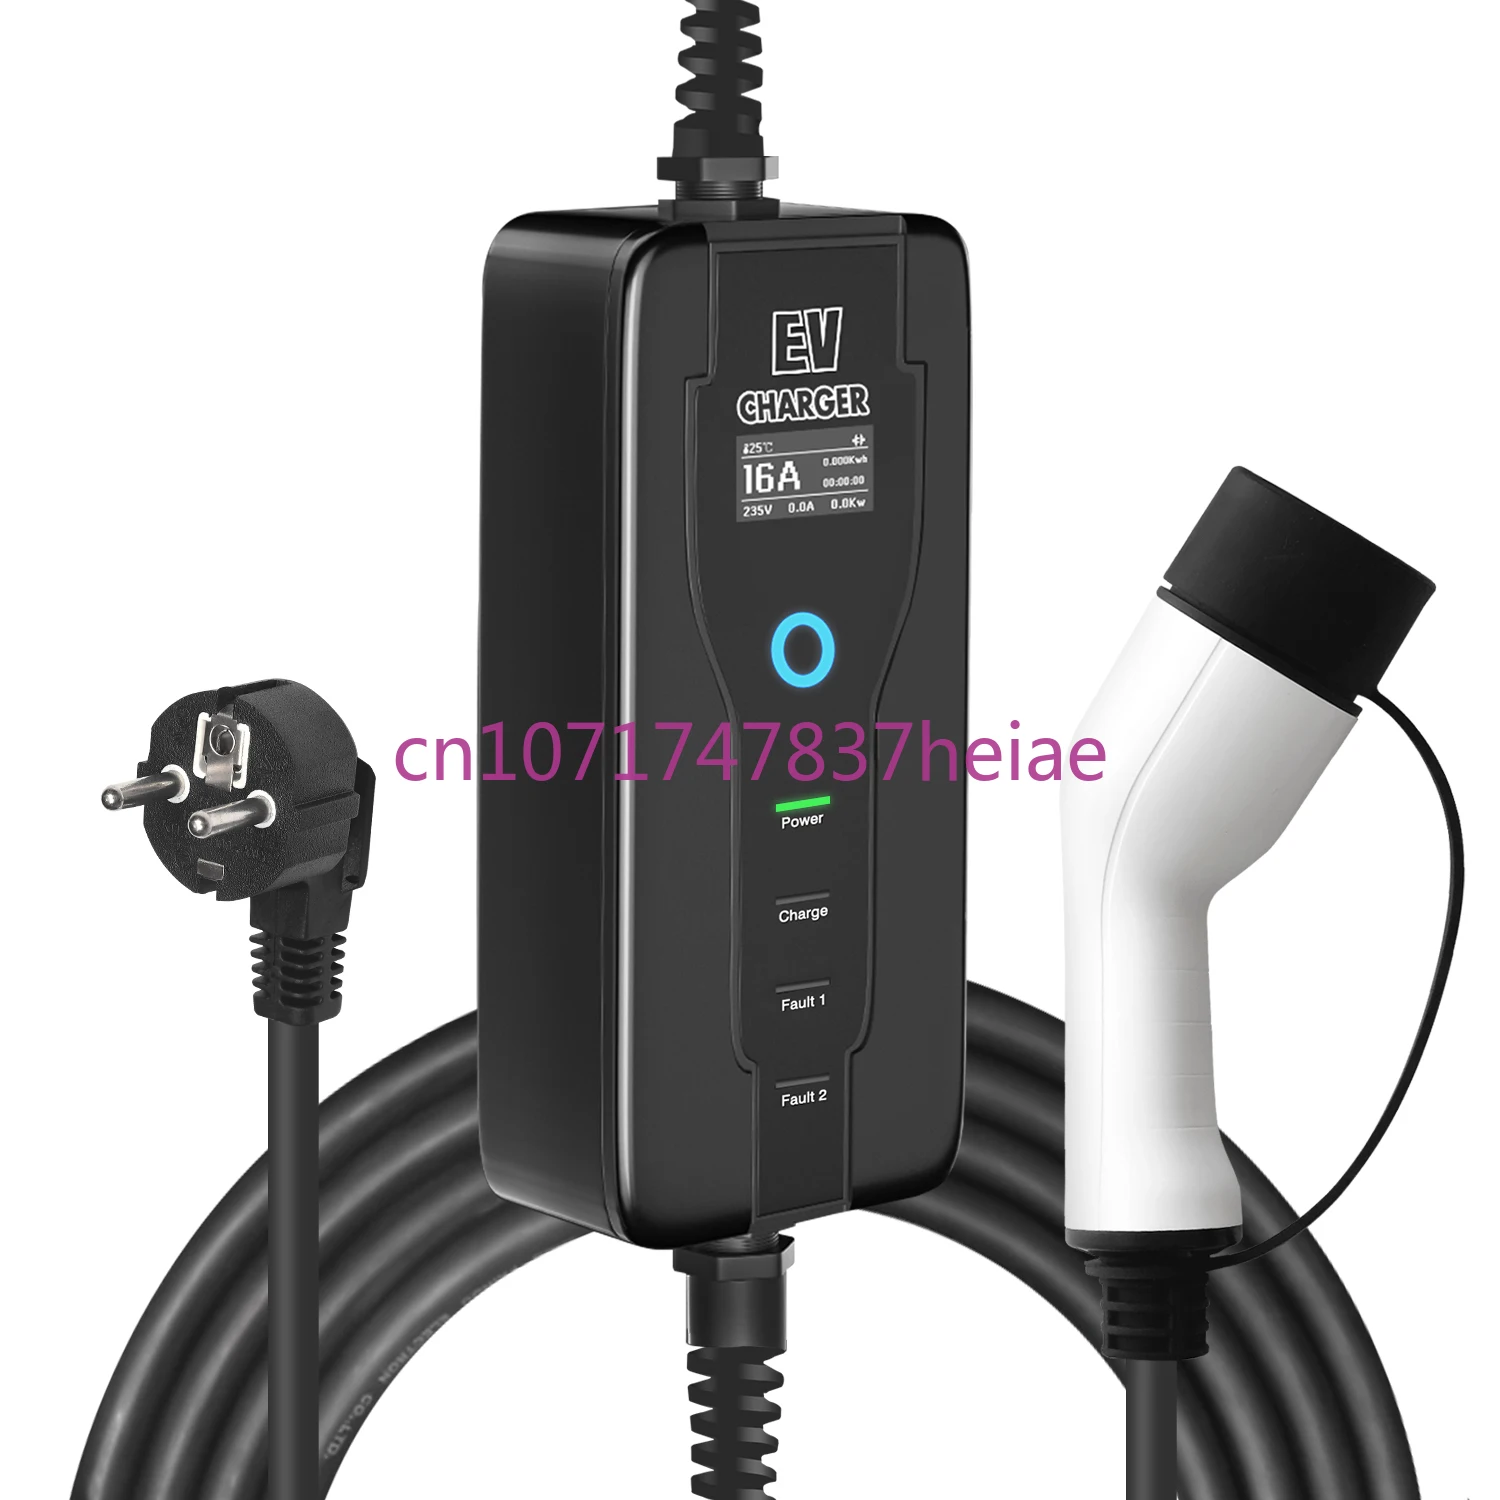 Type 2 EV Charger Level 2 16 Amp Portable Electric Vehicle Charger, Schuko  Plug 220V-240V Car Charging Cable, IEC 62196-2 - AliExpress